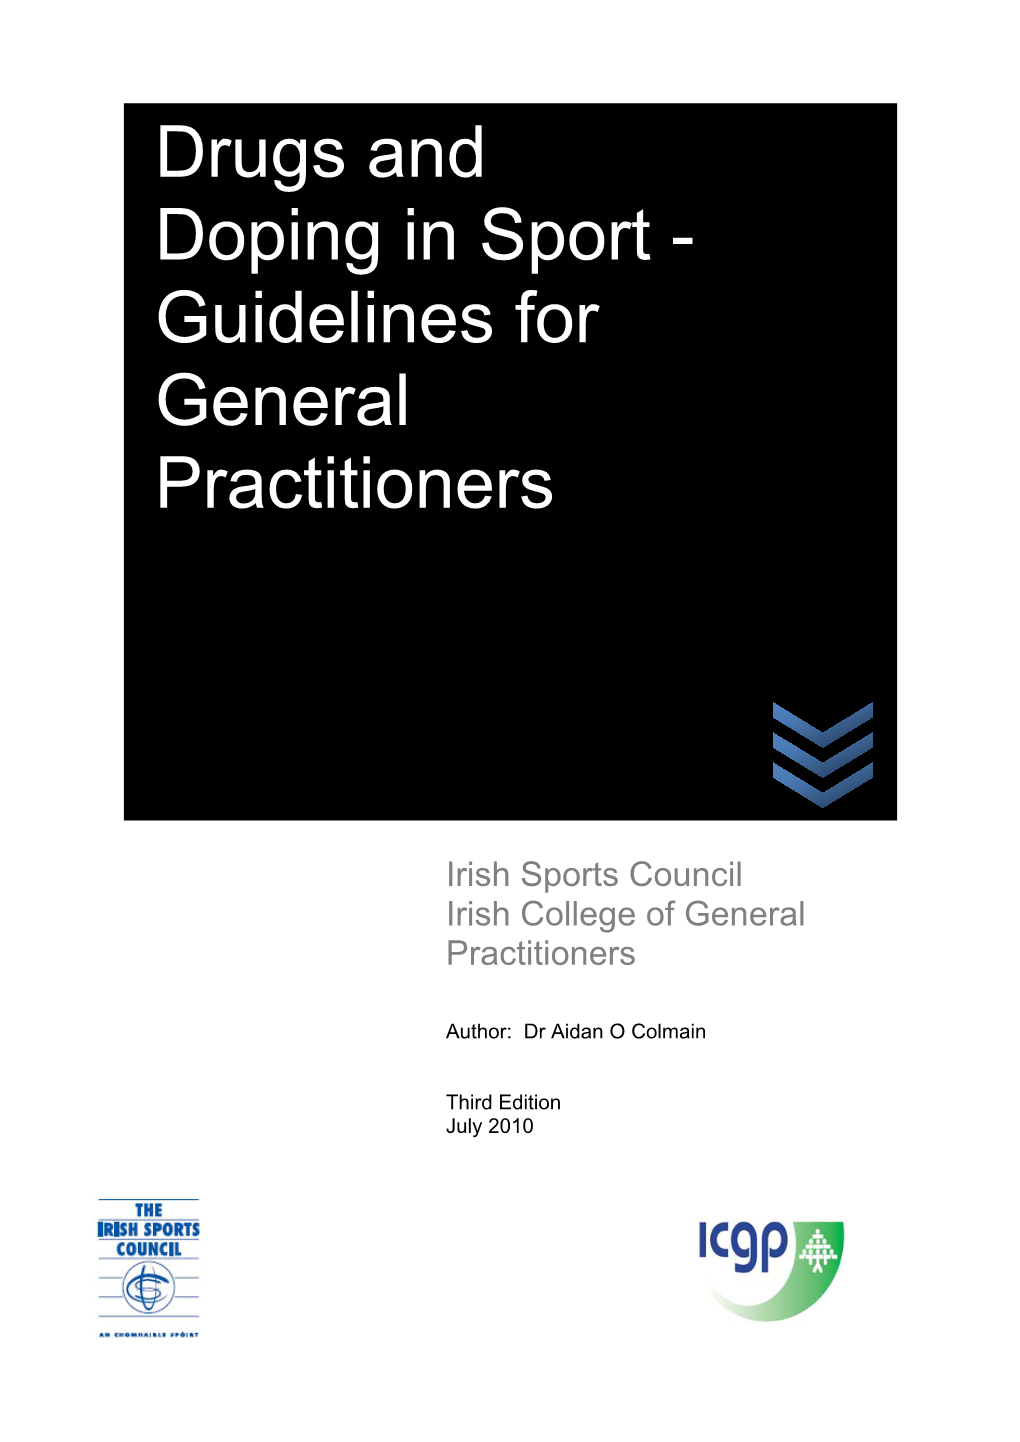 Drugs and Doping in Sport